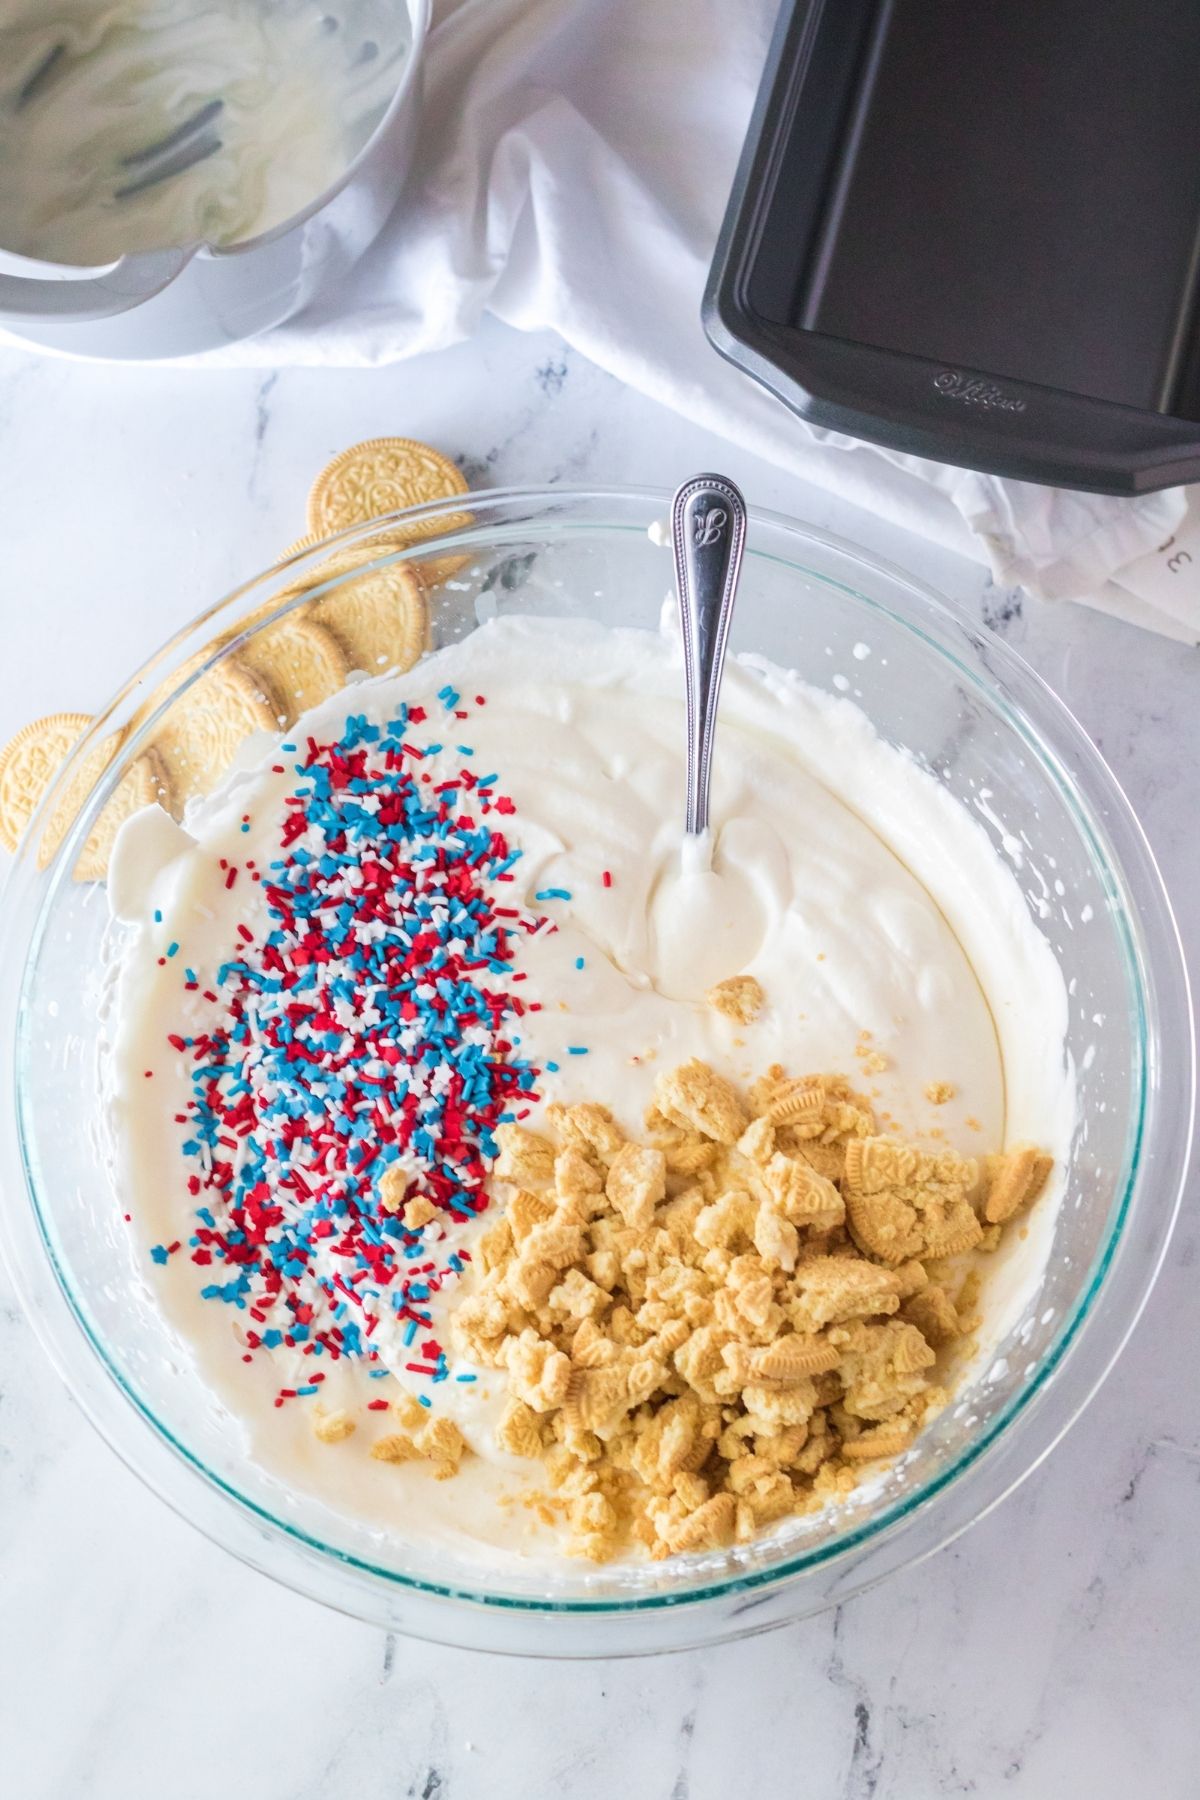 sprinkled and crushed Golden Oreos in ice cream mixture